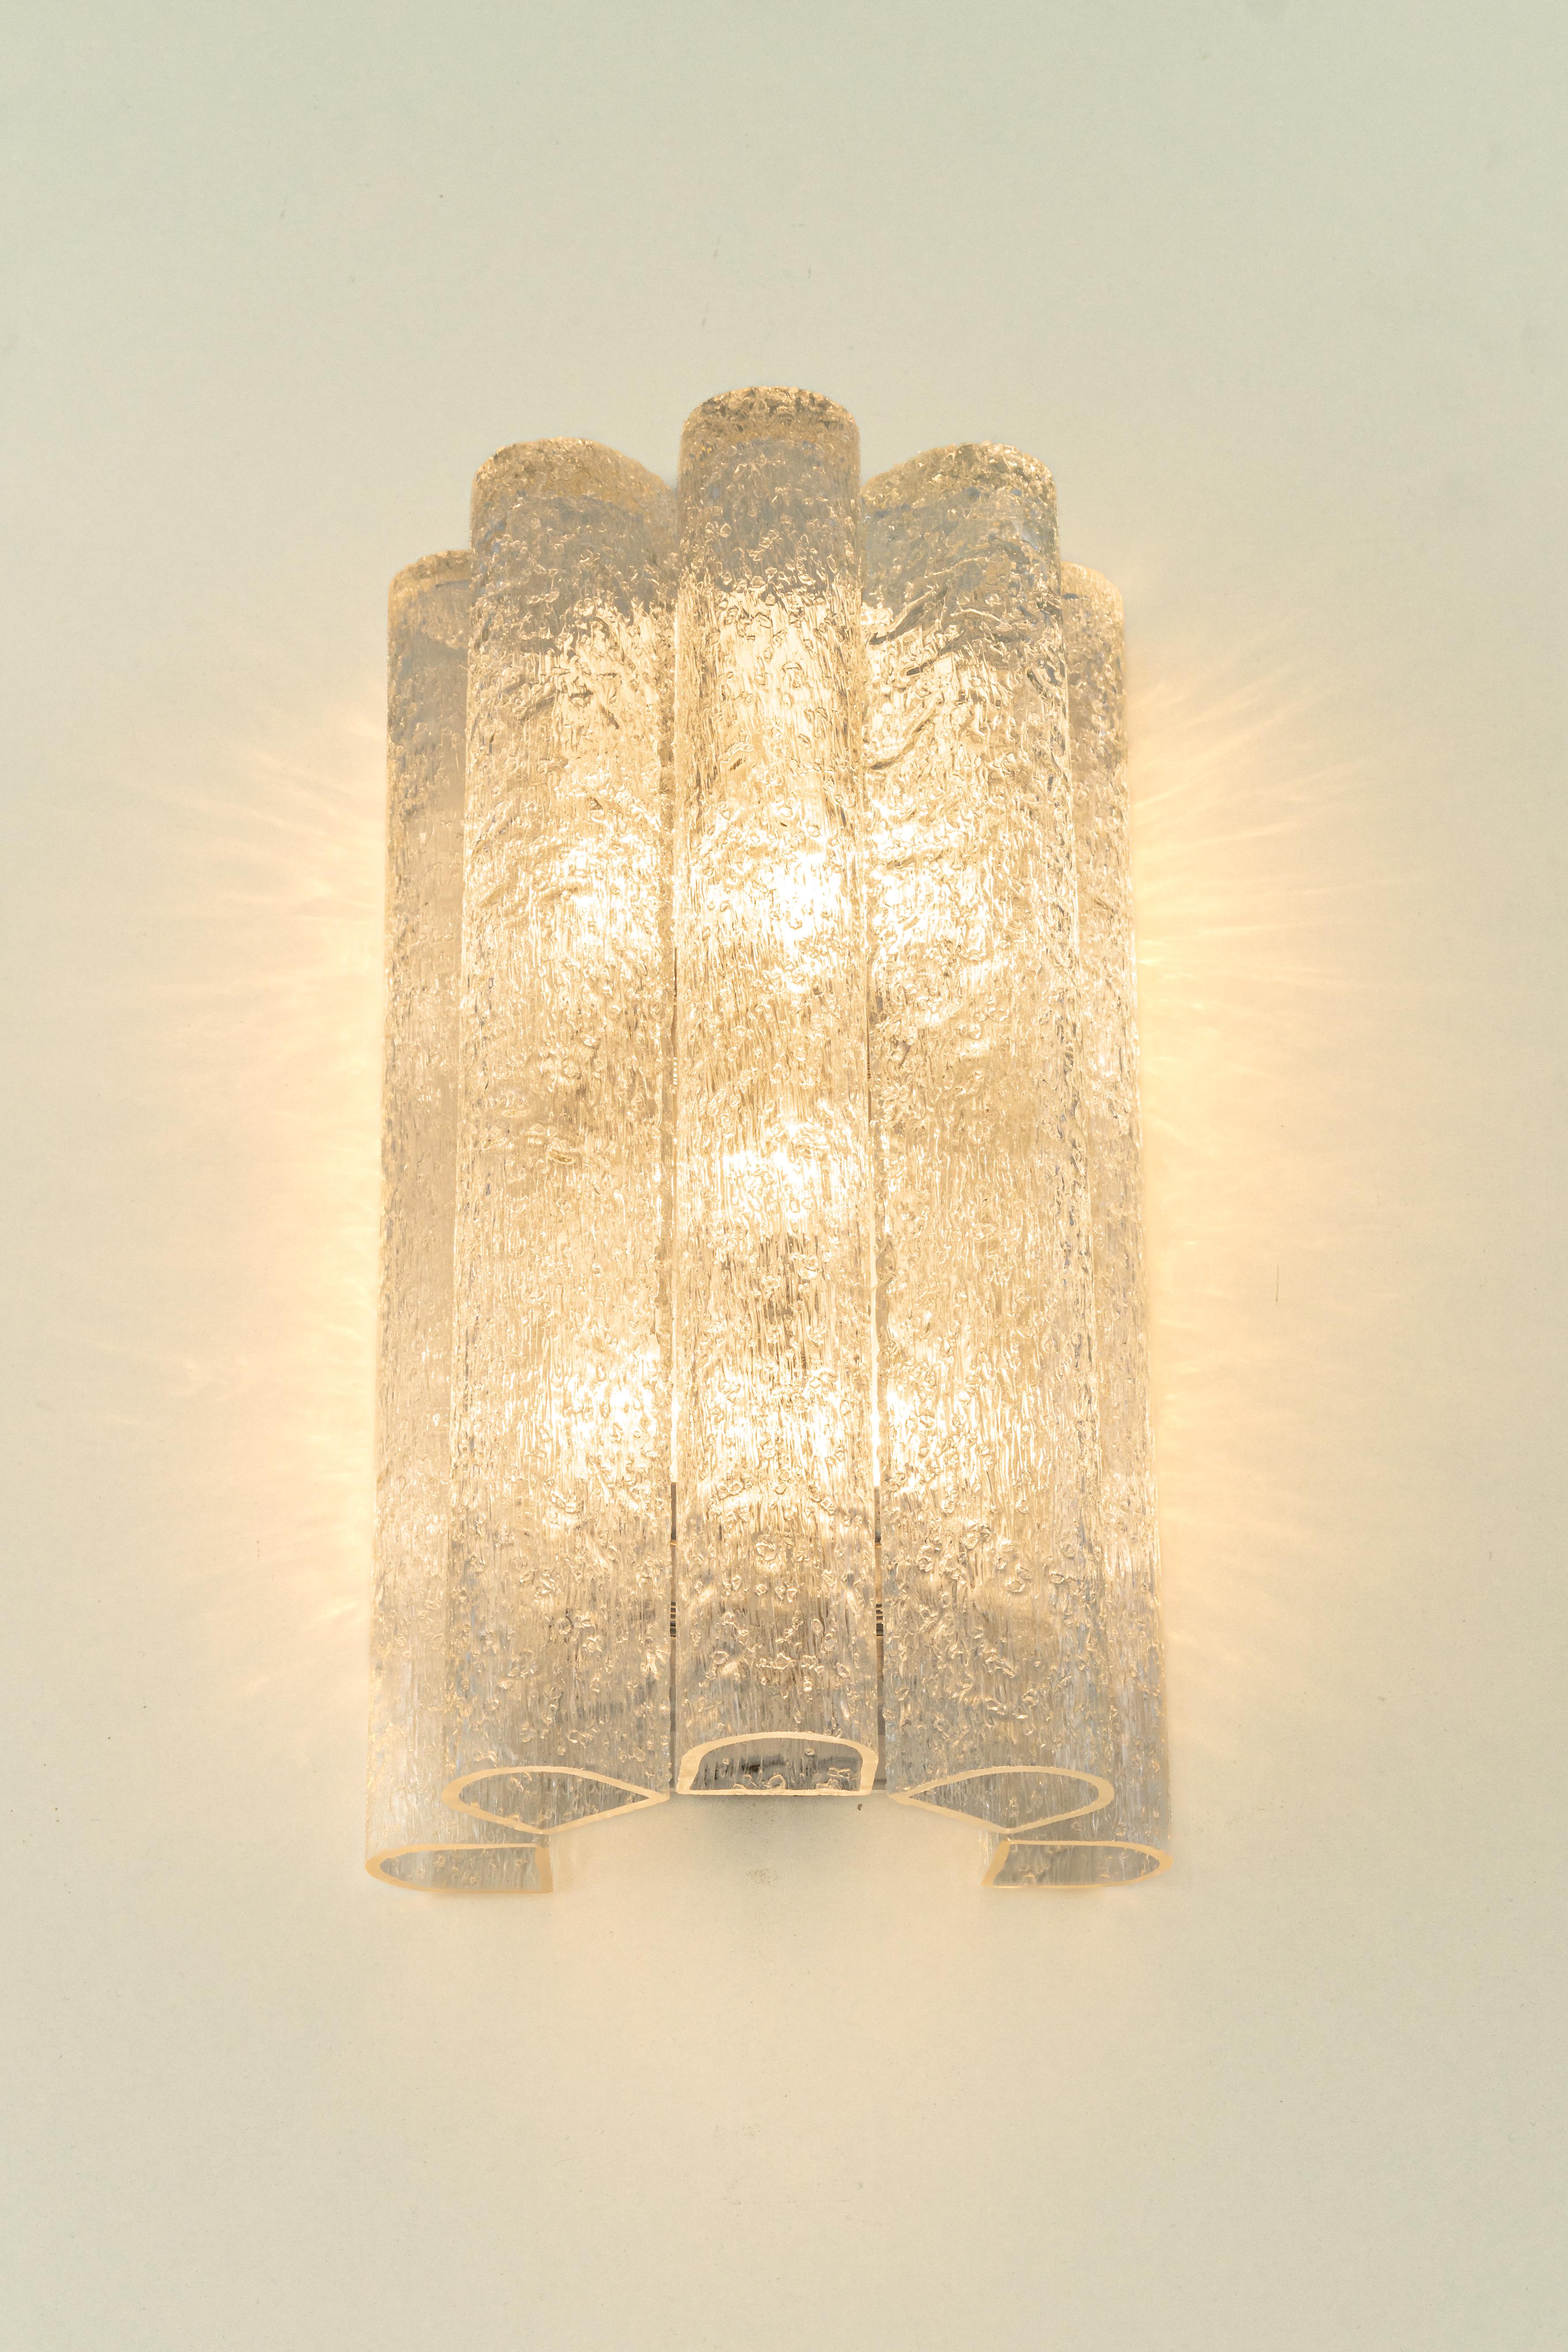 1 of 8 Sets /Large Pair of murano Glass Wall Sconces by Doria, Germany, 1960s For Sale 5